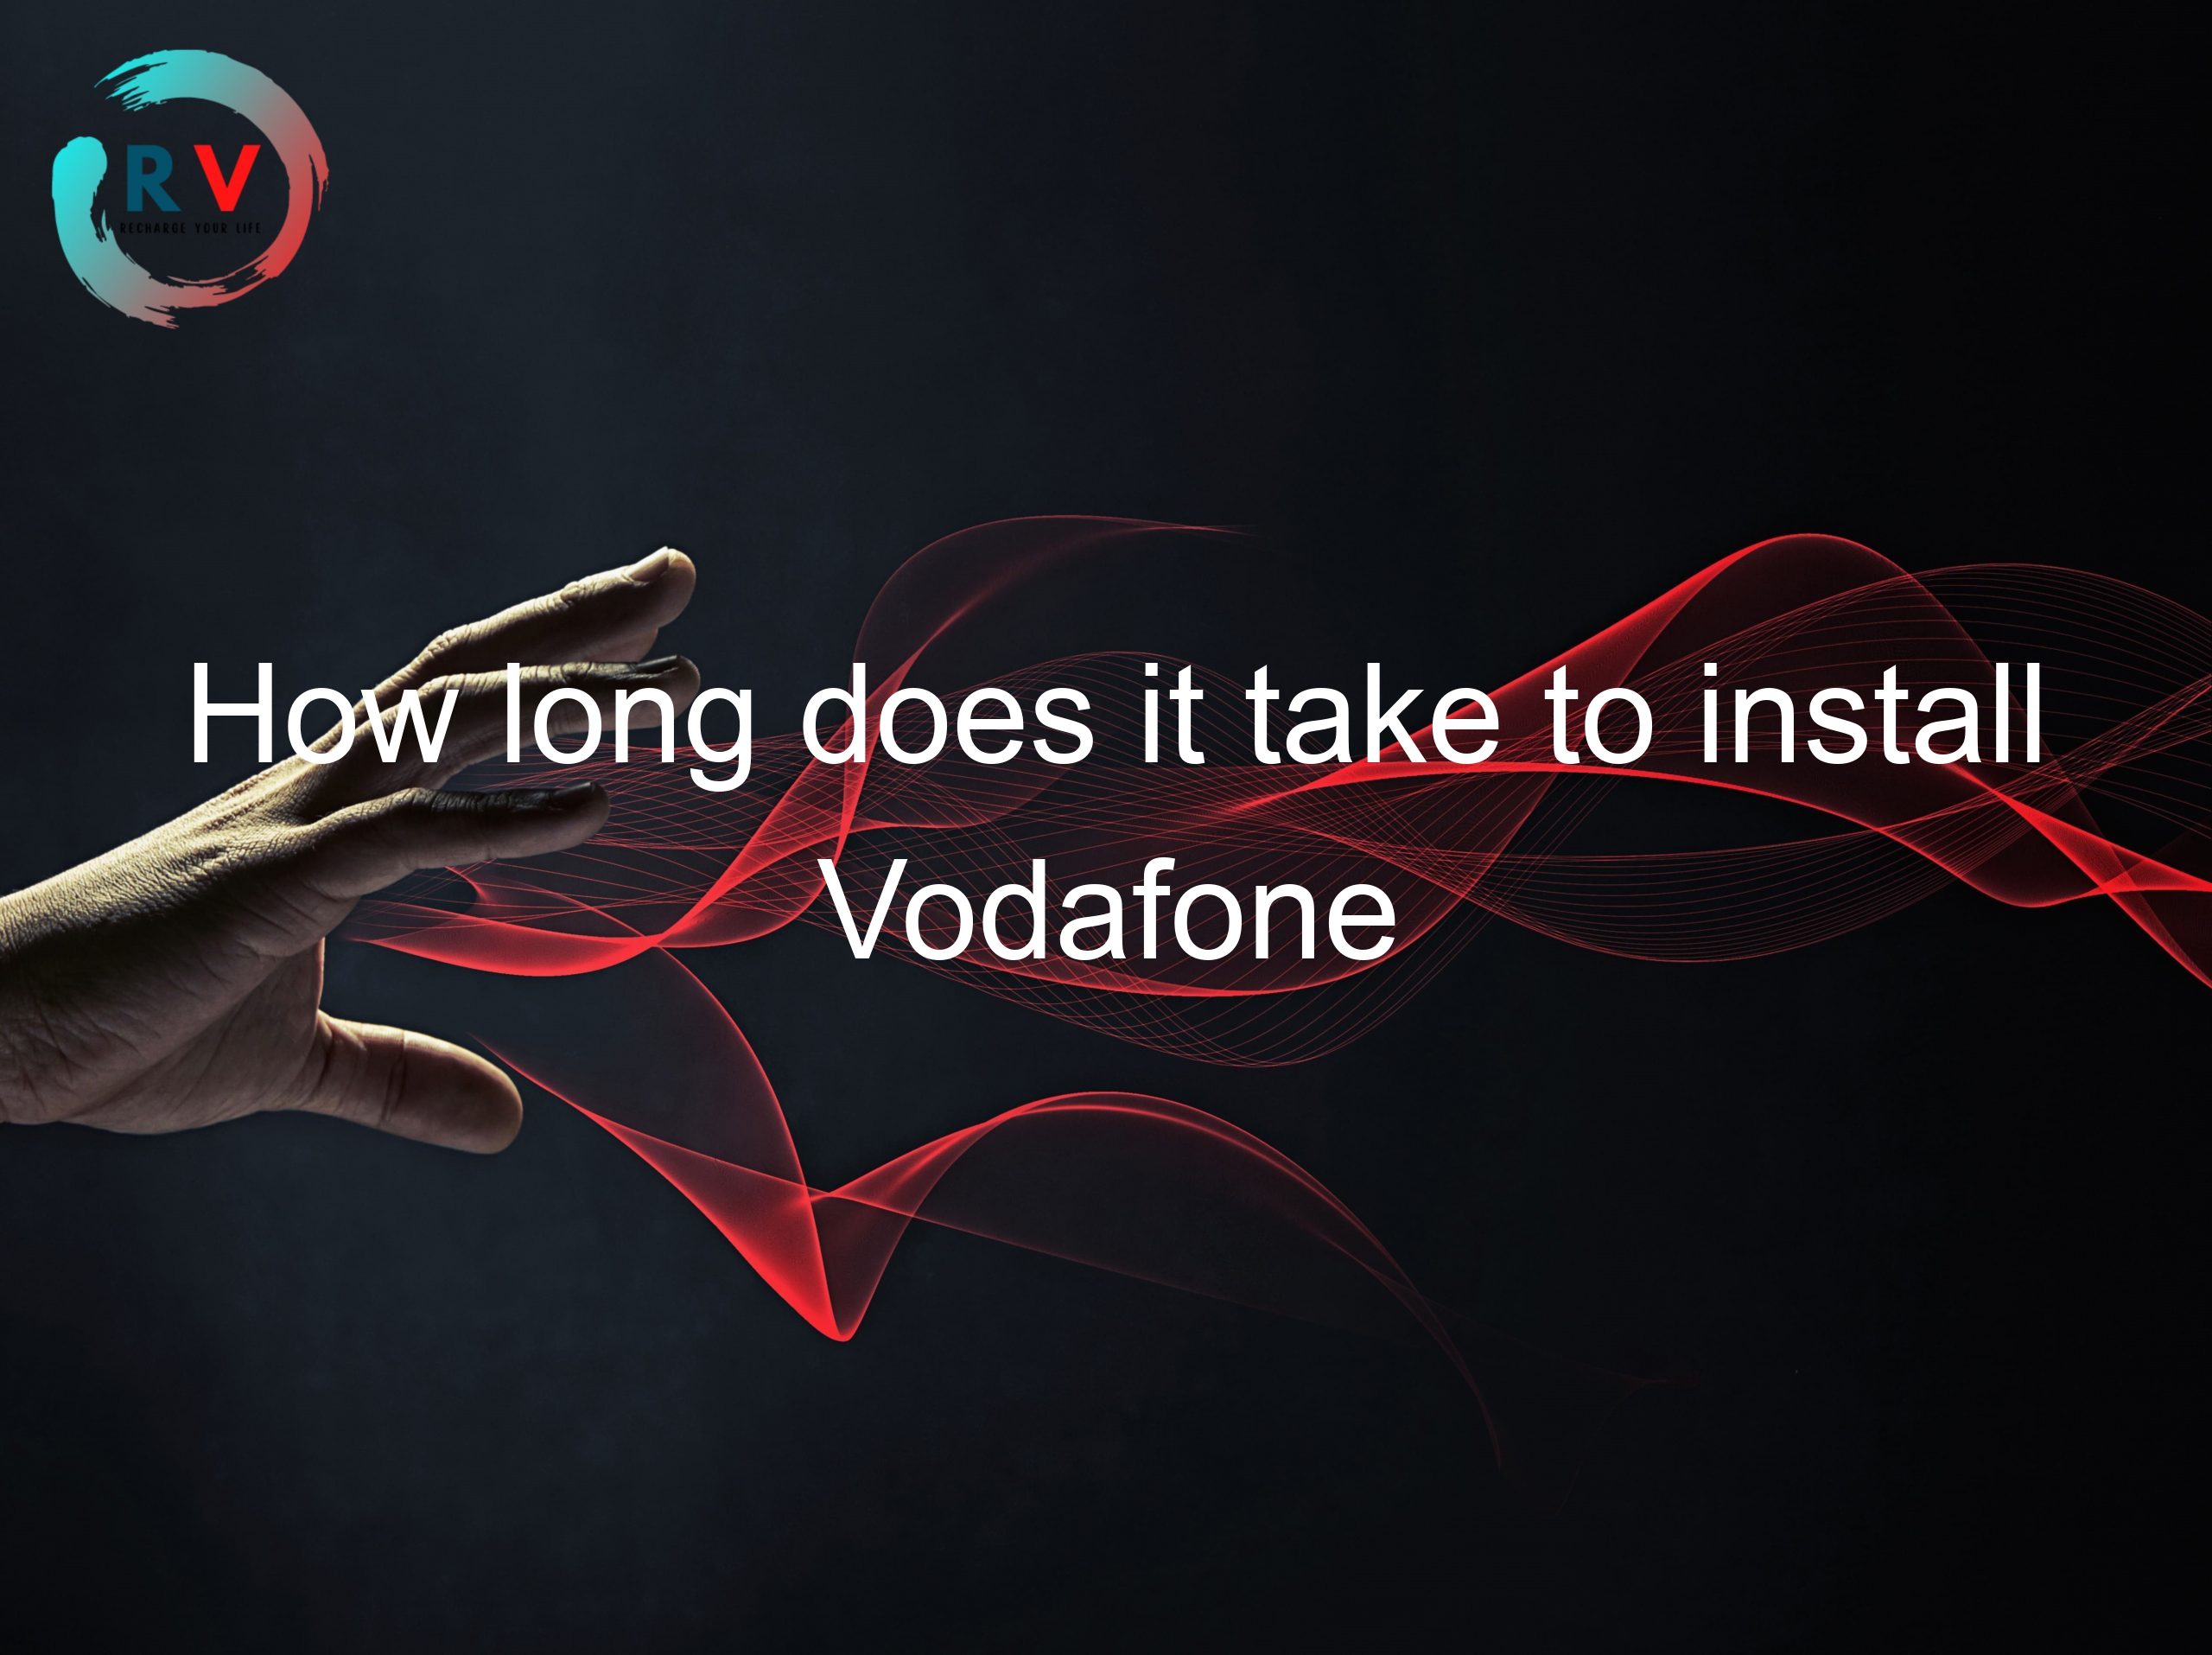 How long does it take to install Vodafone broadband? - Find out in our latest article!